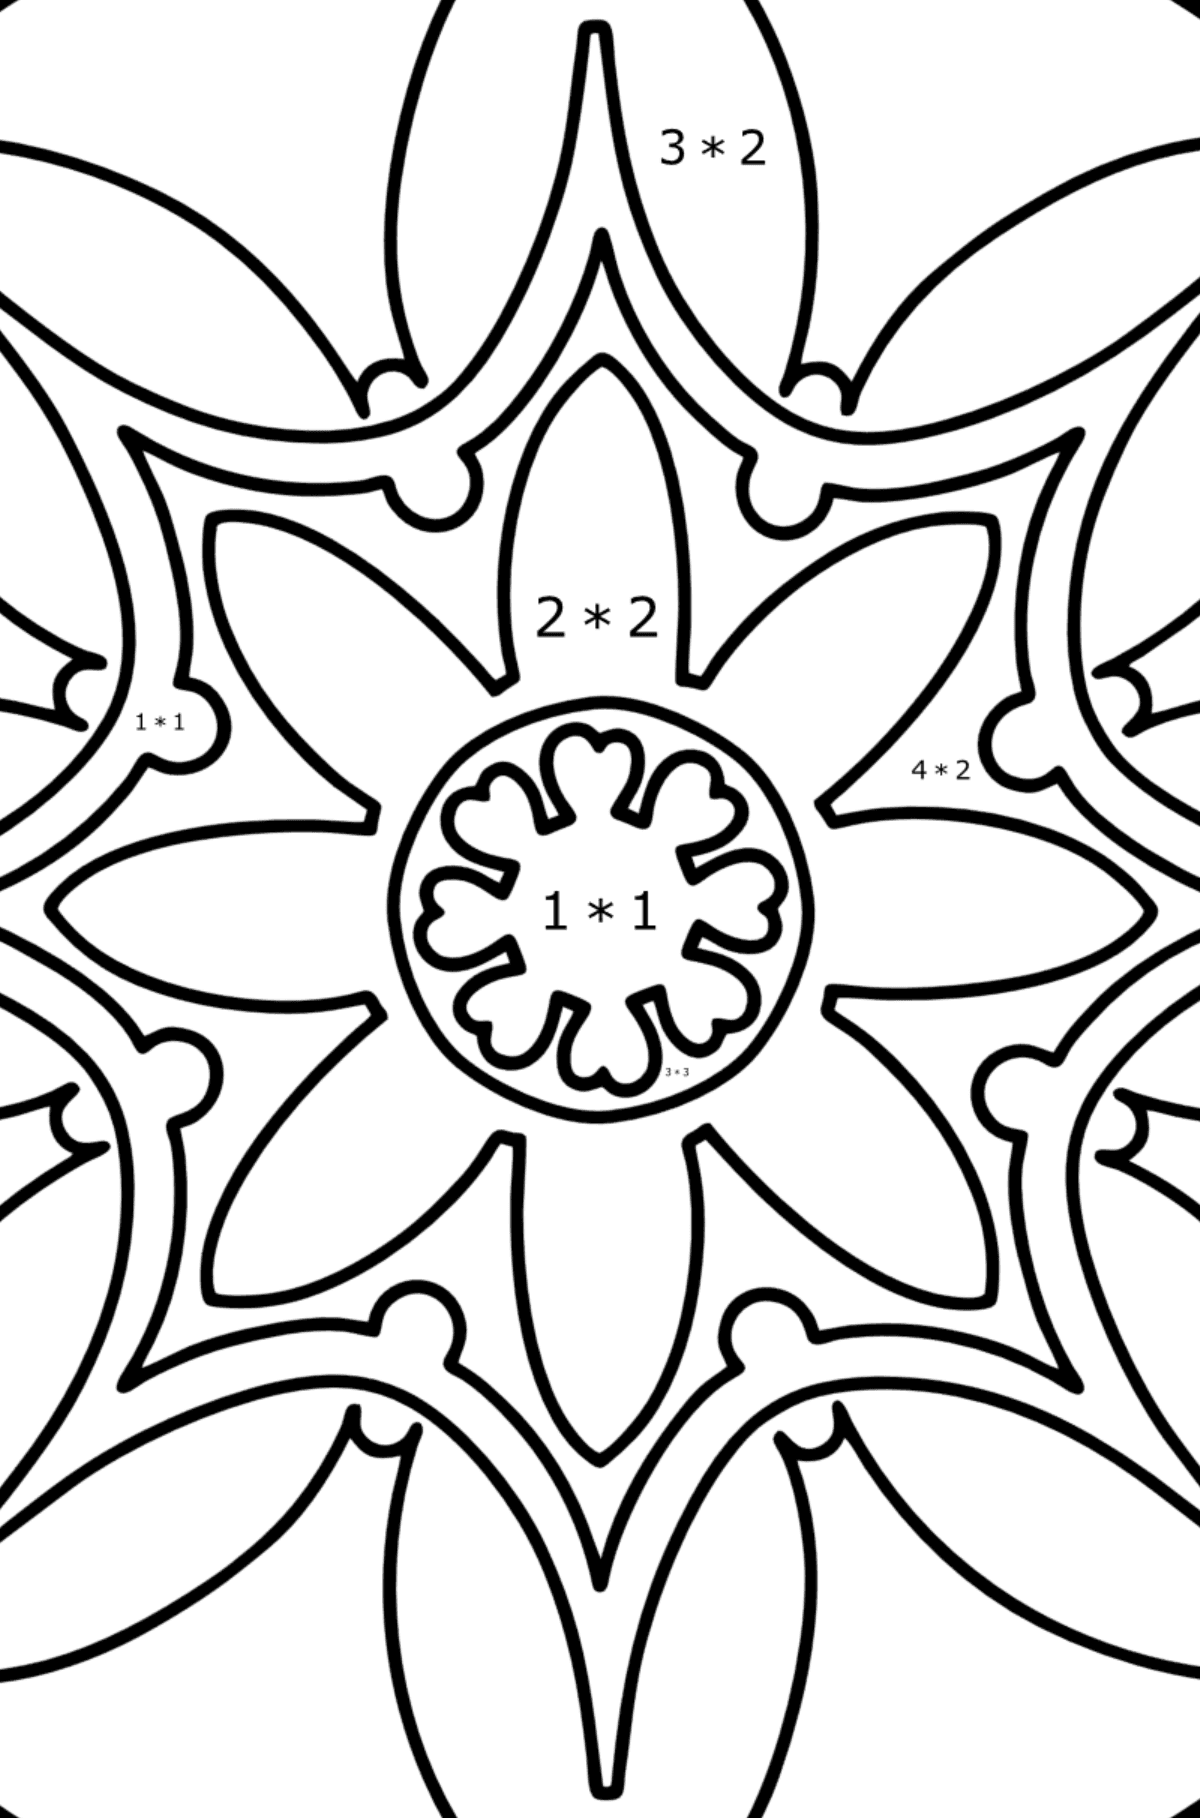 Mandala coloring page - 7 elements - Math Coloring - Multiplication for Kids